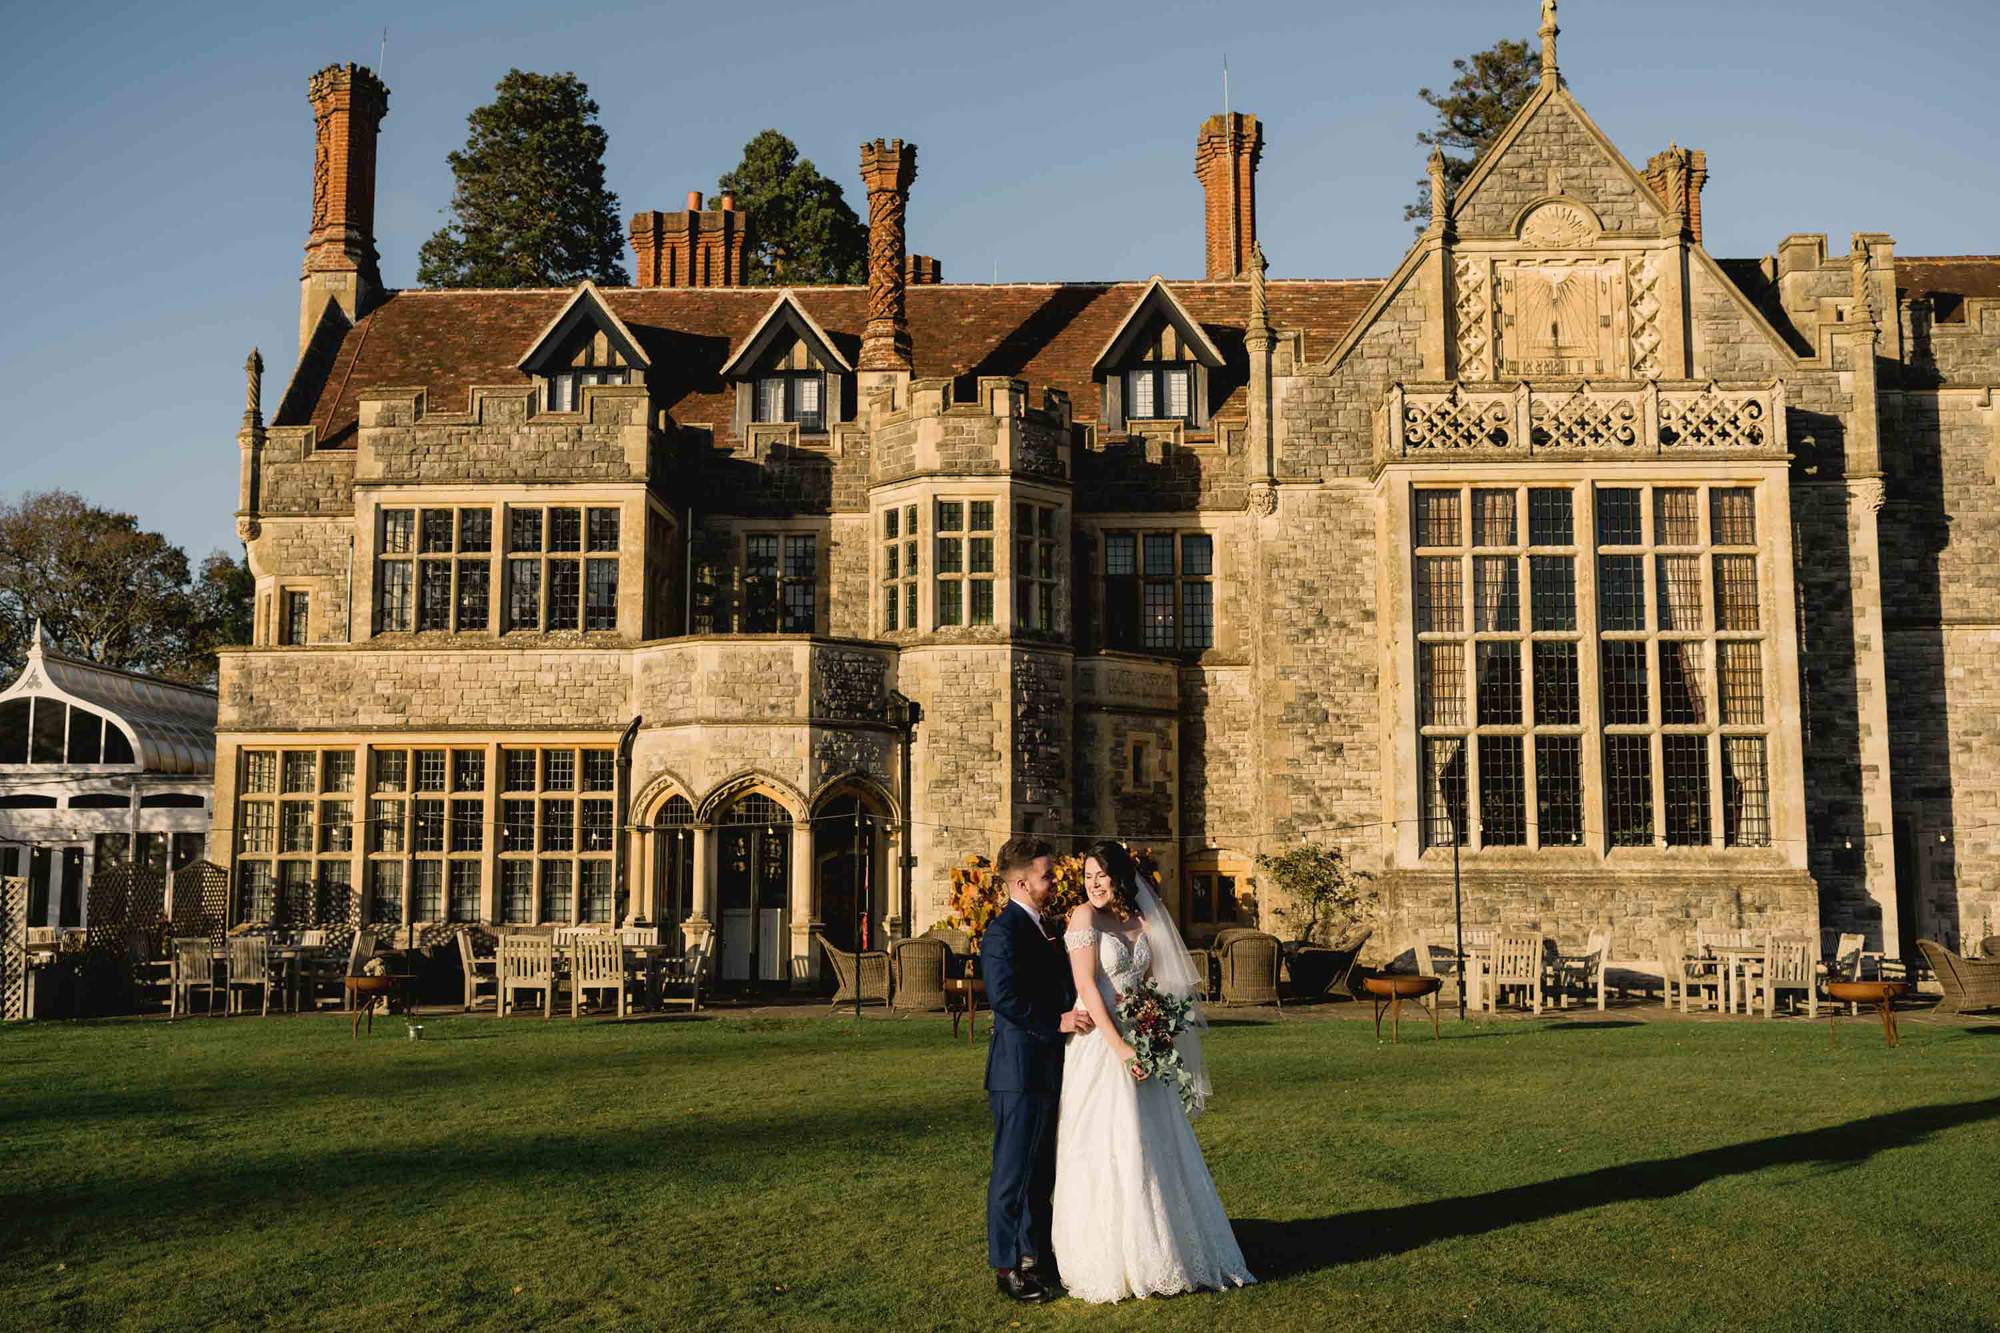 Bride and groom have a cuddle at Rhinefield House wedding venue in Hampshire.